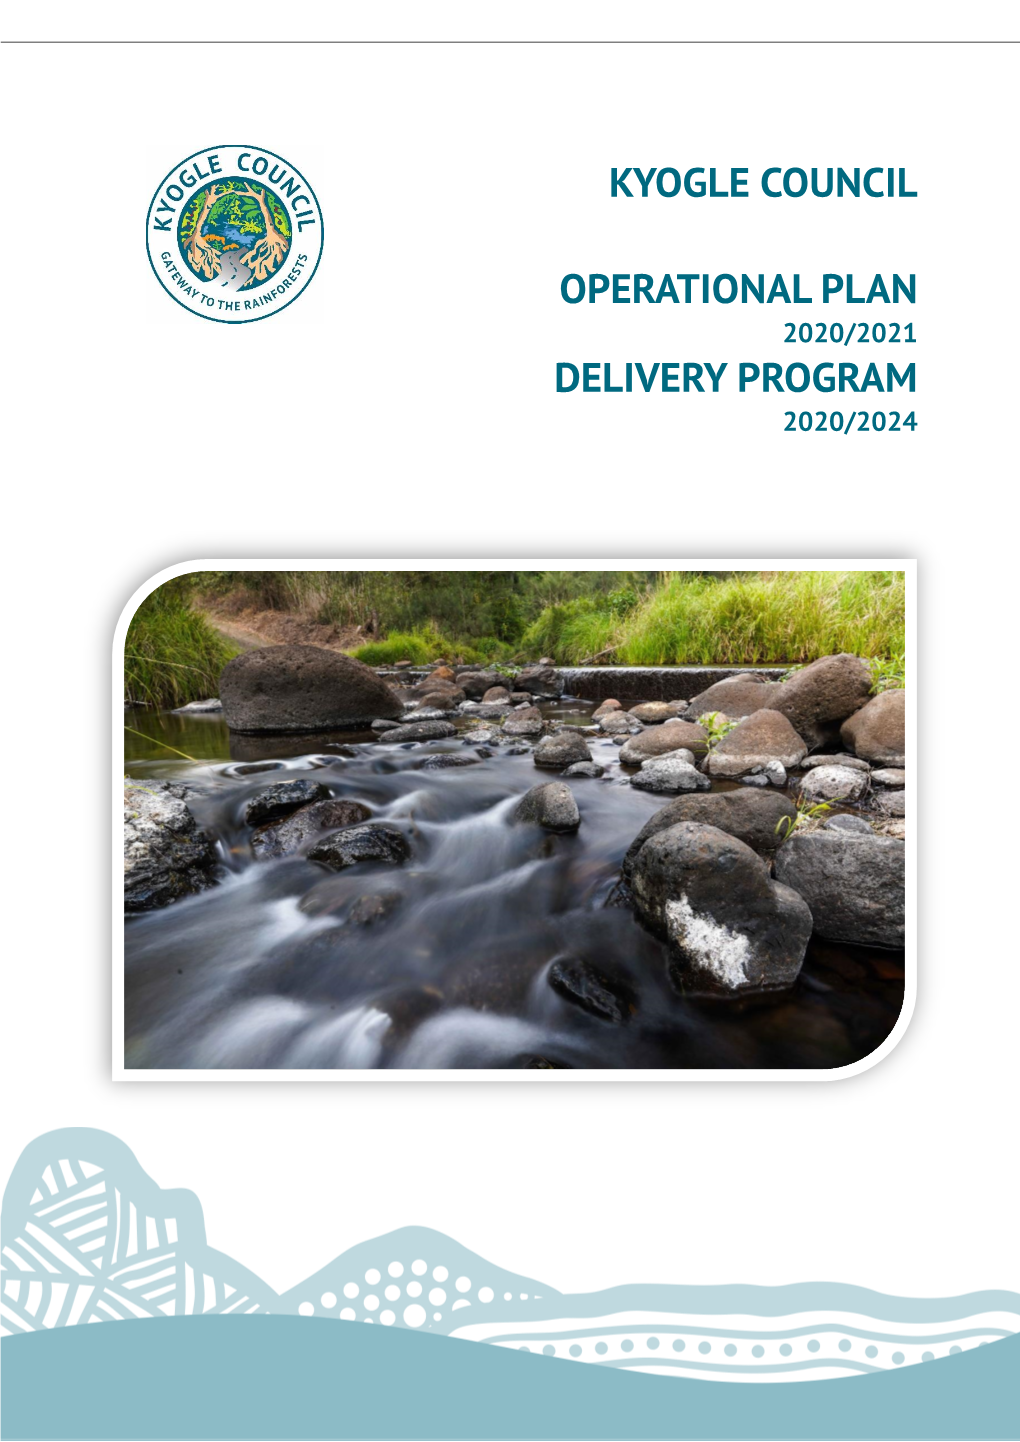 Delivery Program 2020/2024 and Operational Plan 2020/2021